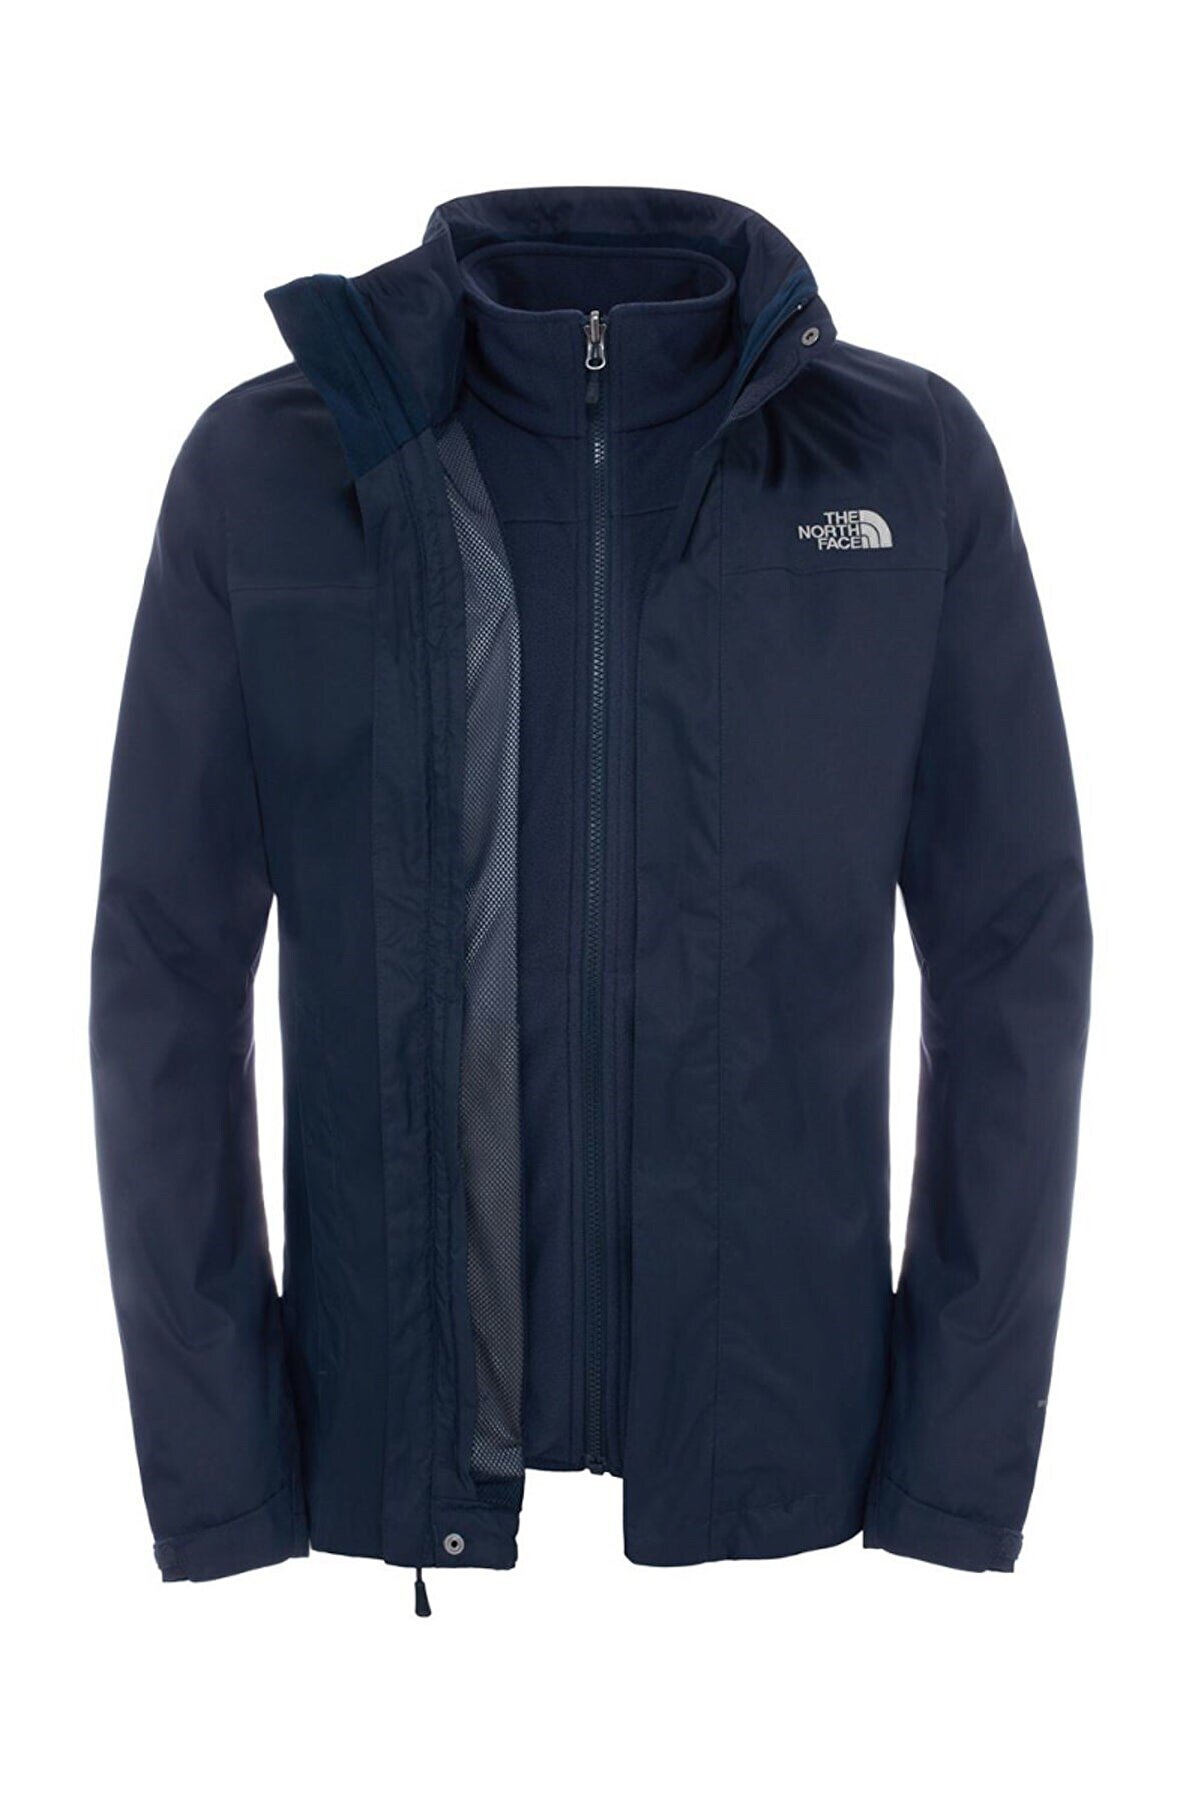 The North Face The Nort Face M Evolve Ii Triclimate Erkek Mont Nf00cg55jk3